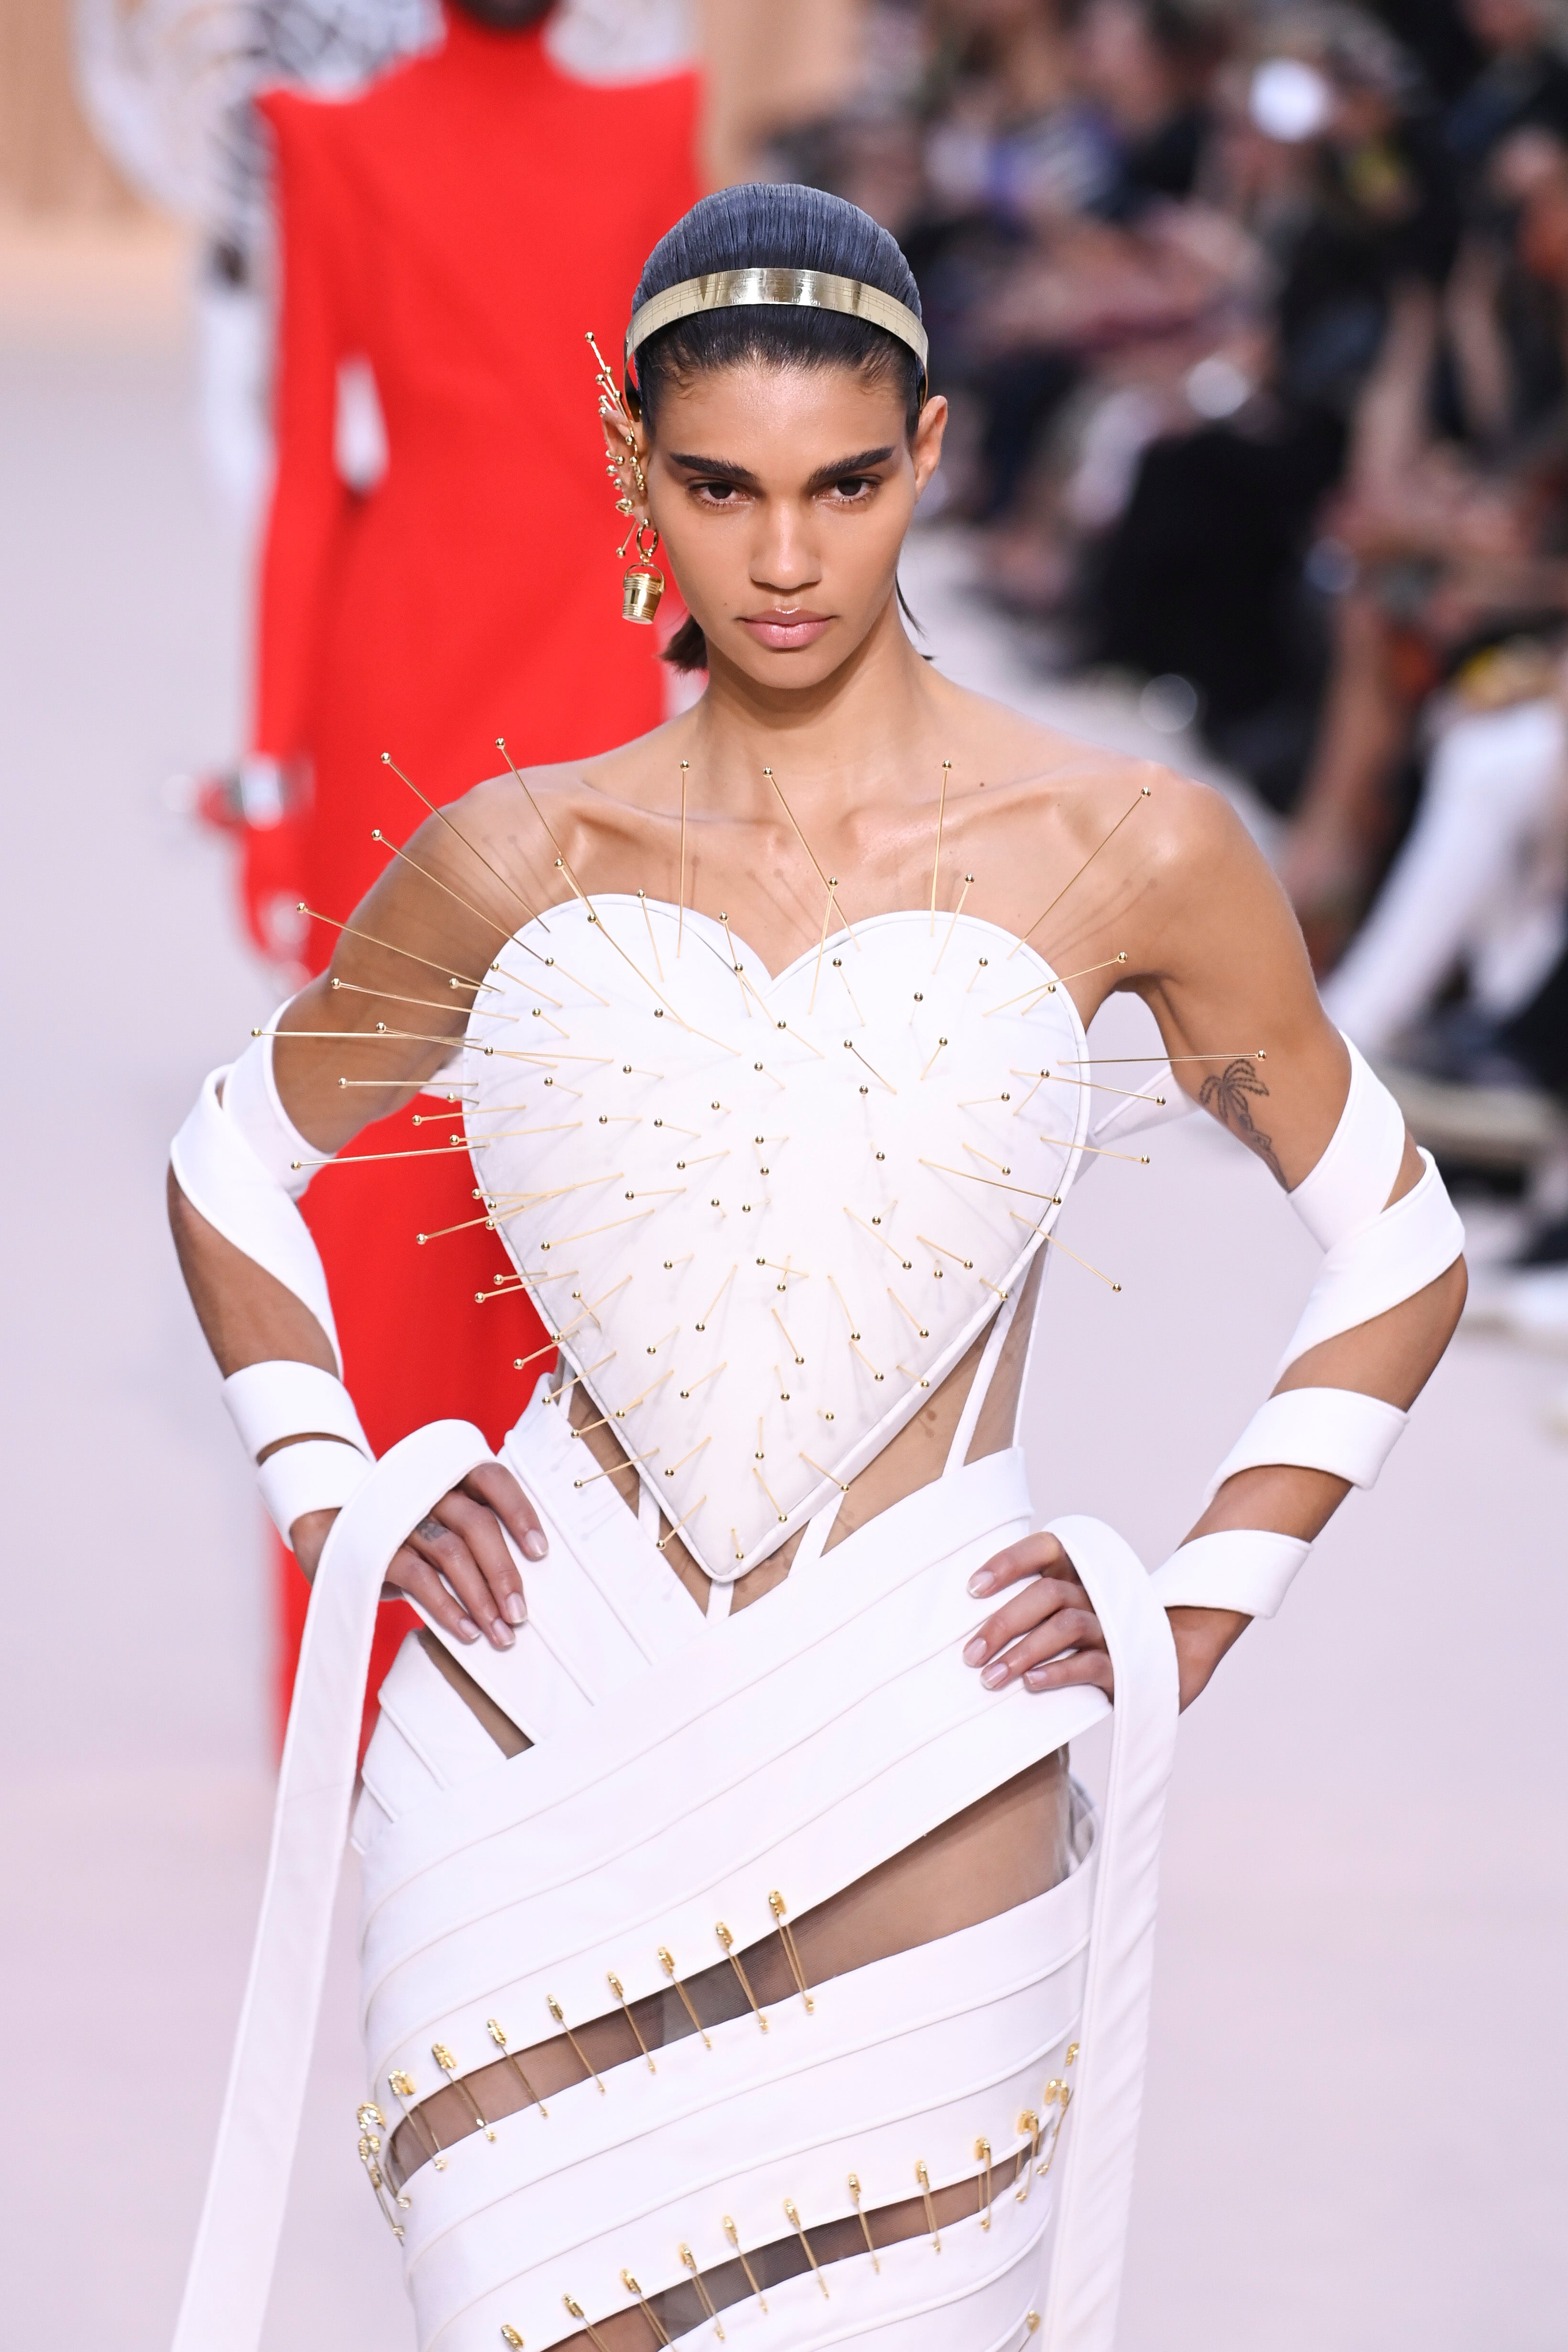 One of the couture garments on show at the Jean Paul Gaultier Fall/Winter couture Paris show on 6 July 2022